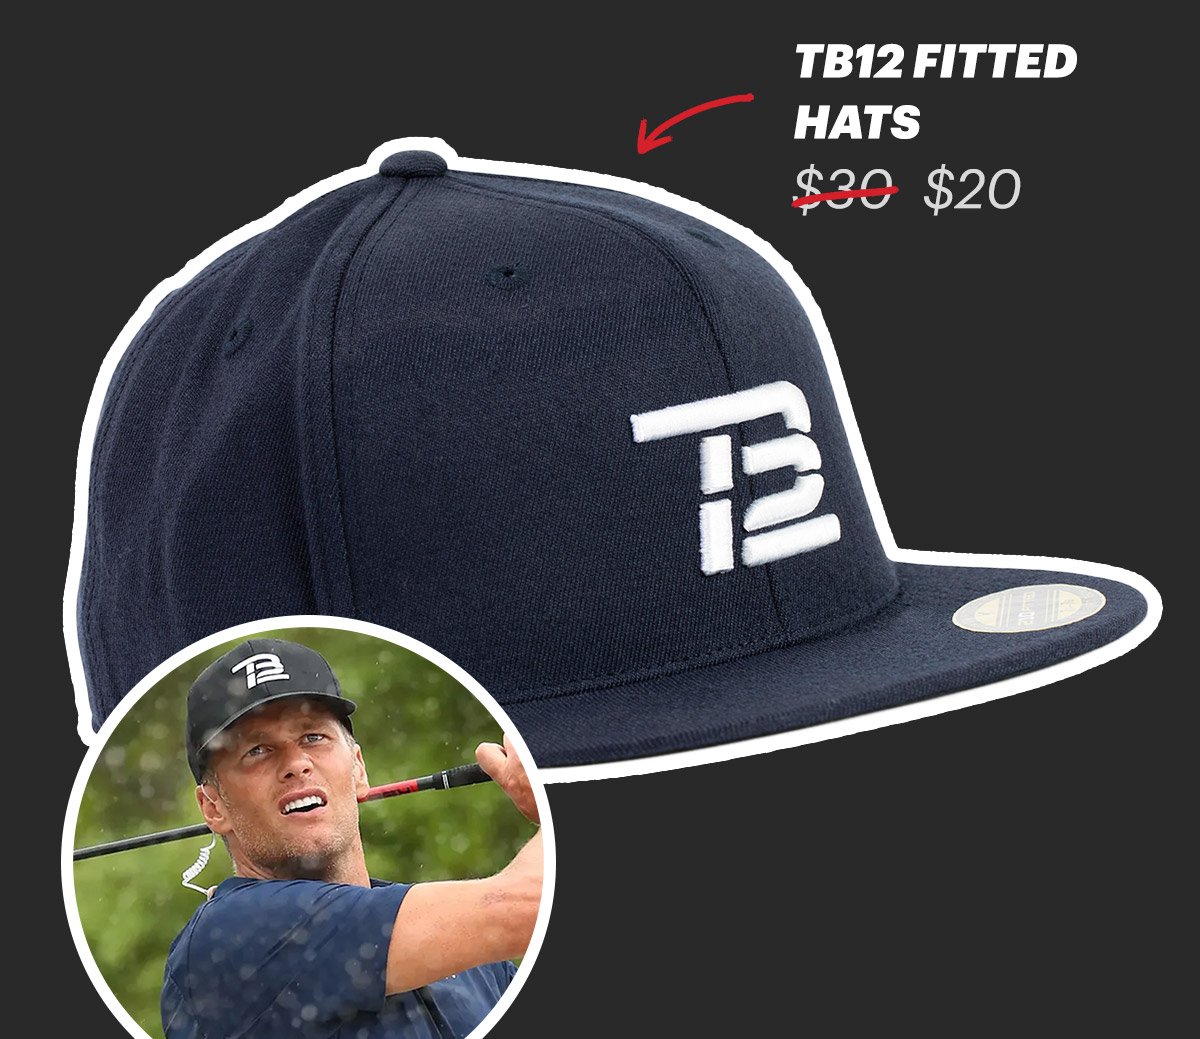 TB12 Fitted Hats